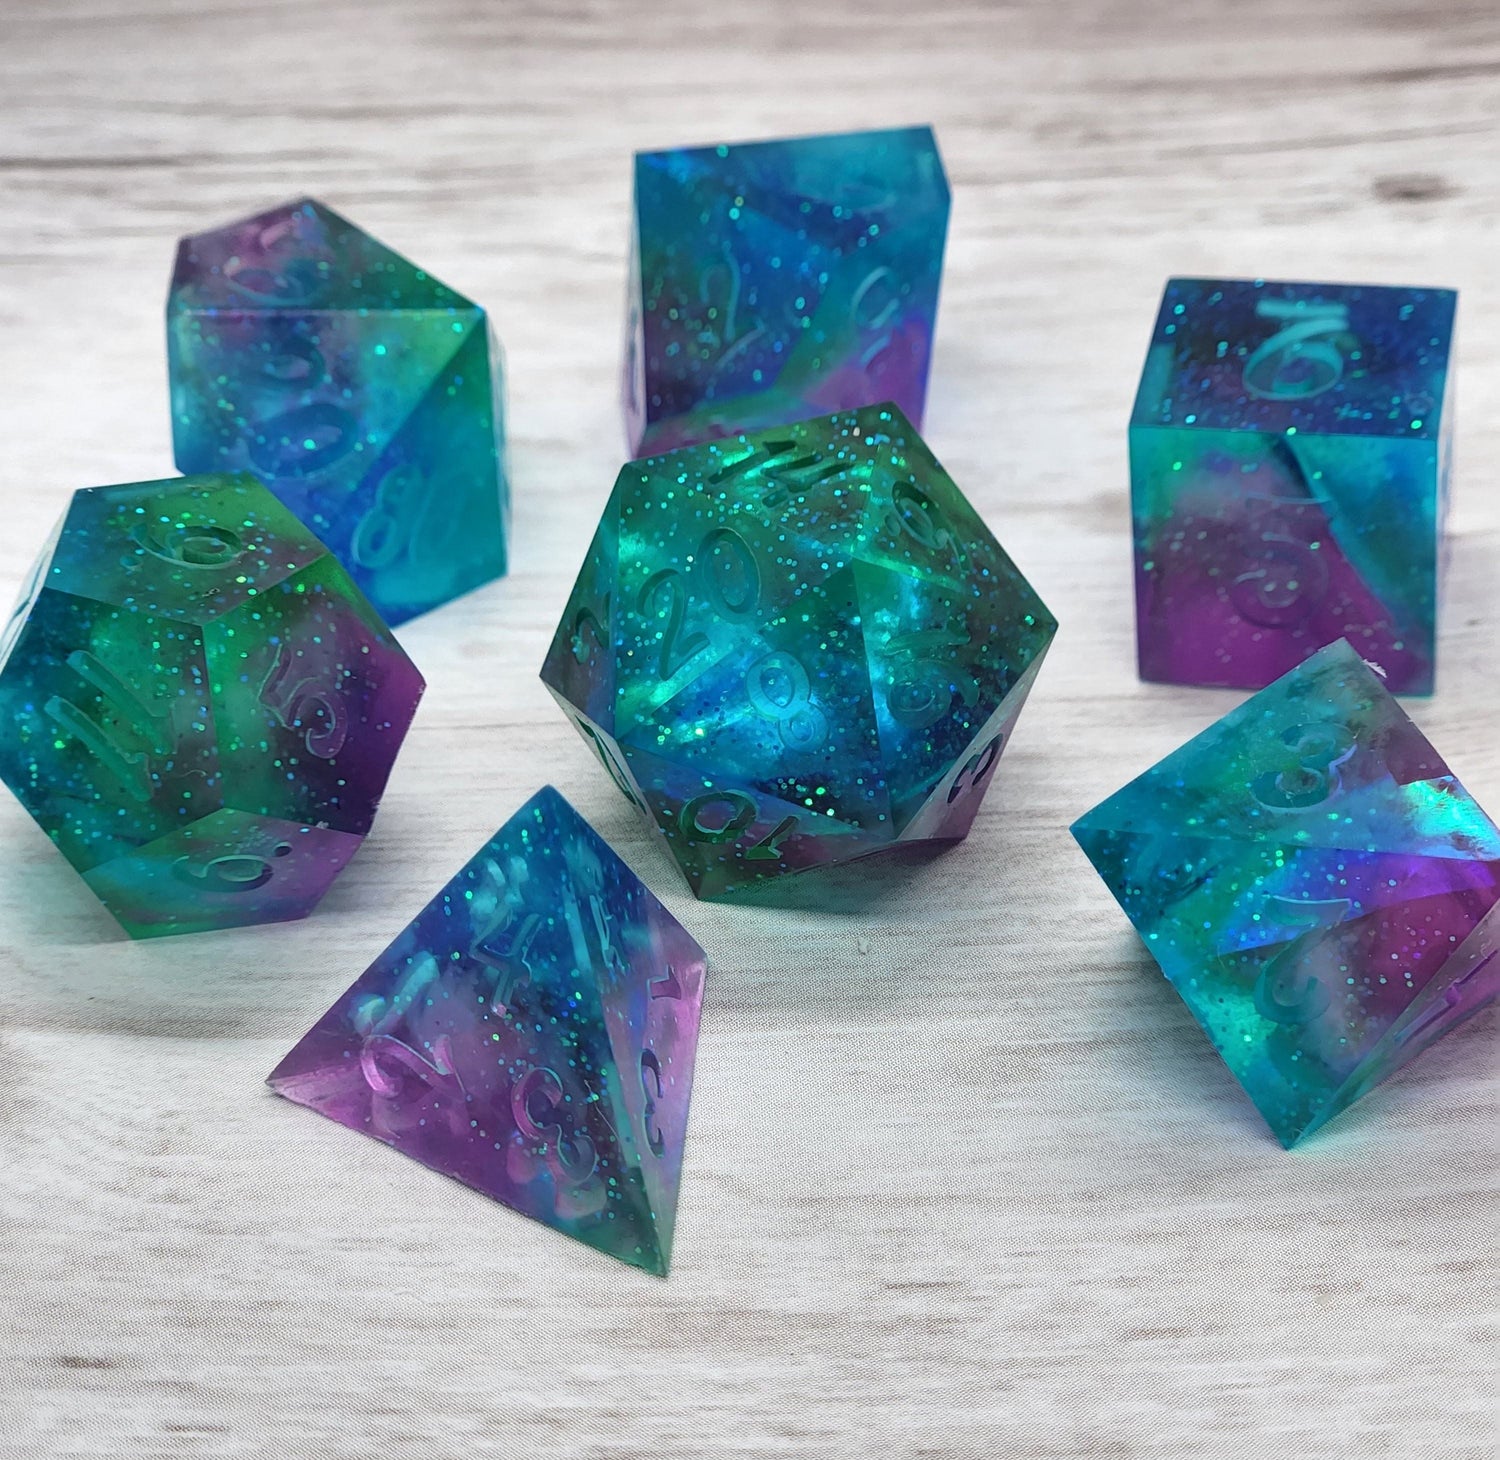 A set of 7 polyhedral dice that with a purple, blue, and teal galaxy look.